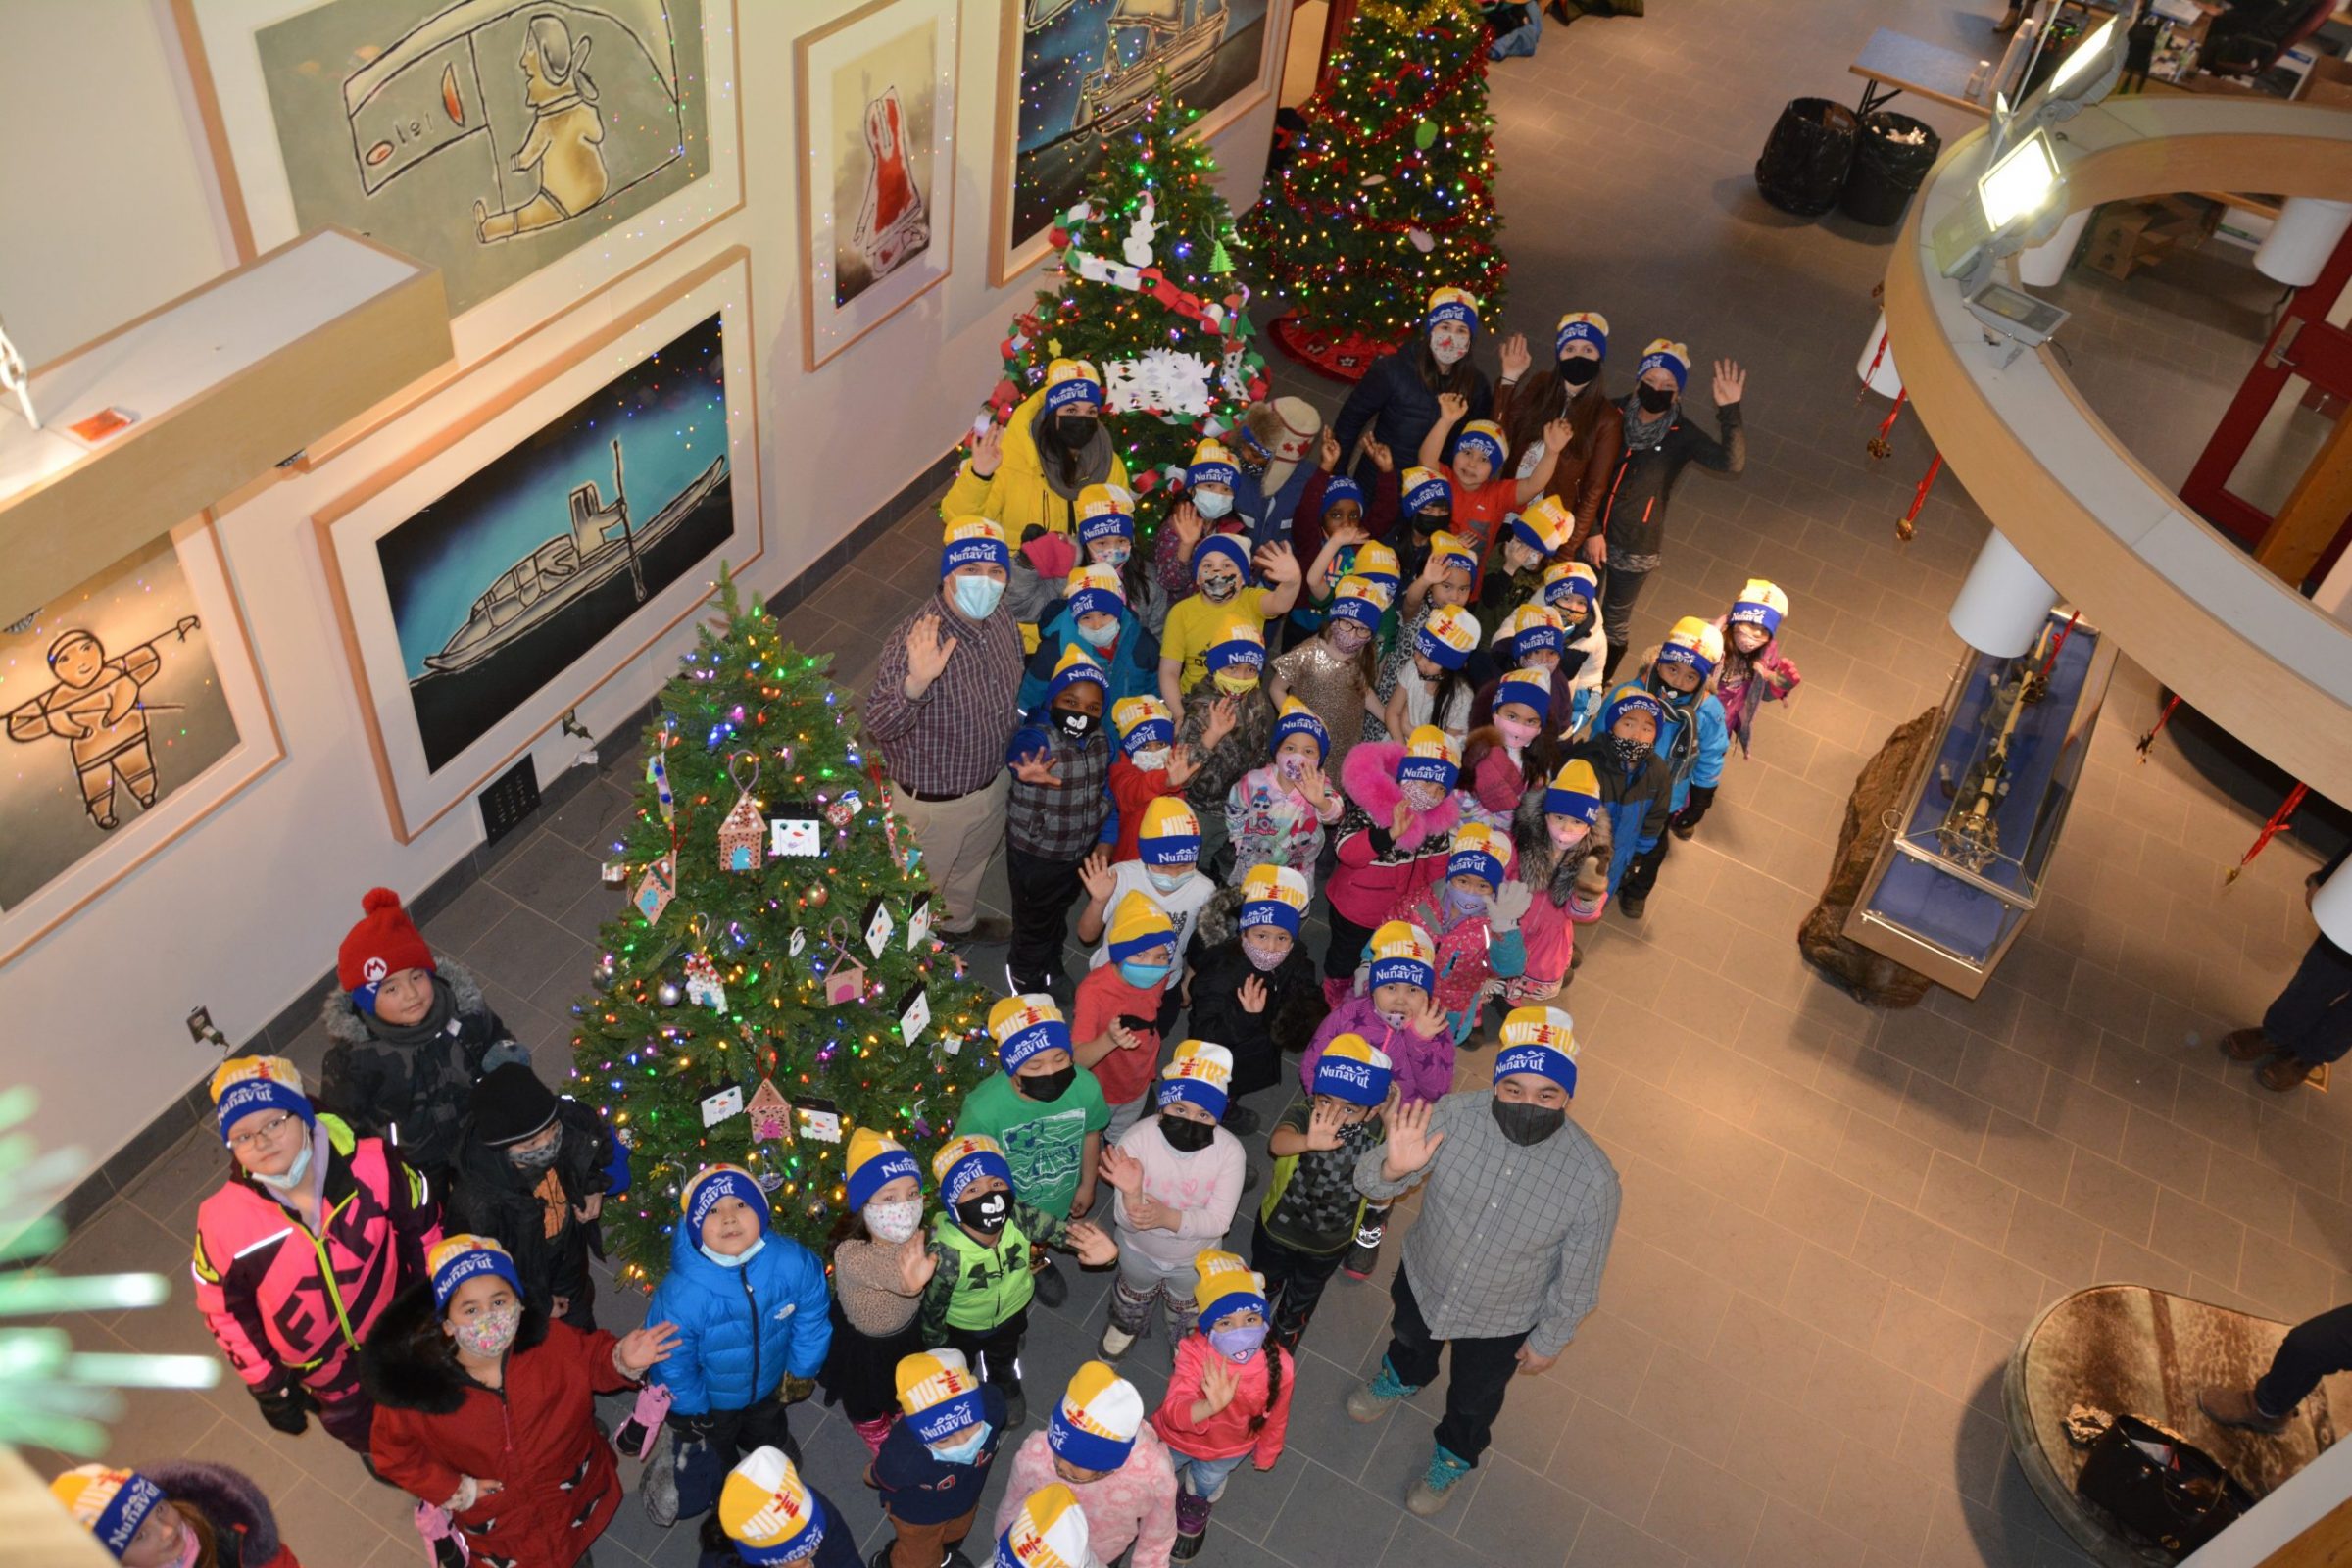 Elementary and middle school students from Iqaluit have been decorating Christmas trees in the lobby of the legislative building over the past few days. Here, Grade 1, 2 and 3 students from Nakasuk school are seen wearing toques they were given after lending a hand on Thursday. Premier P.J. Akeeagok also attended the first day of this year’s Christmas Lights Across Canada display at the legislature, which kicked off on Thursday. (Photo by Maggie Nooshoota)